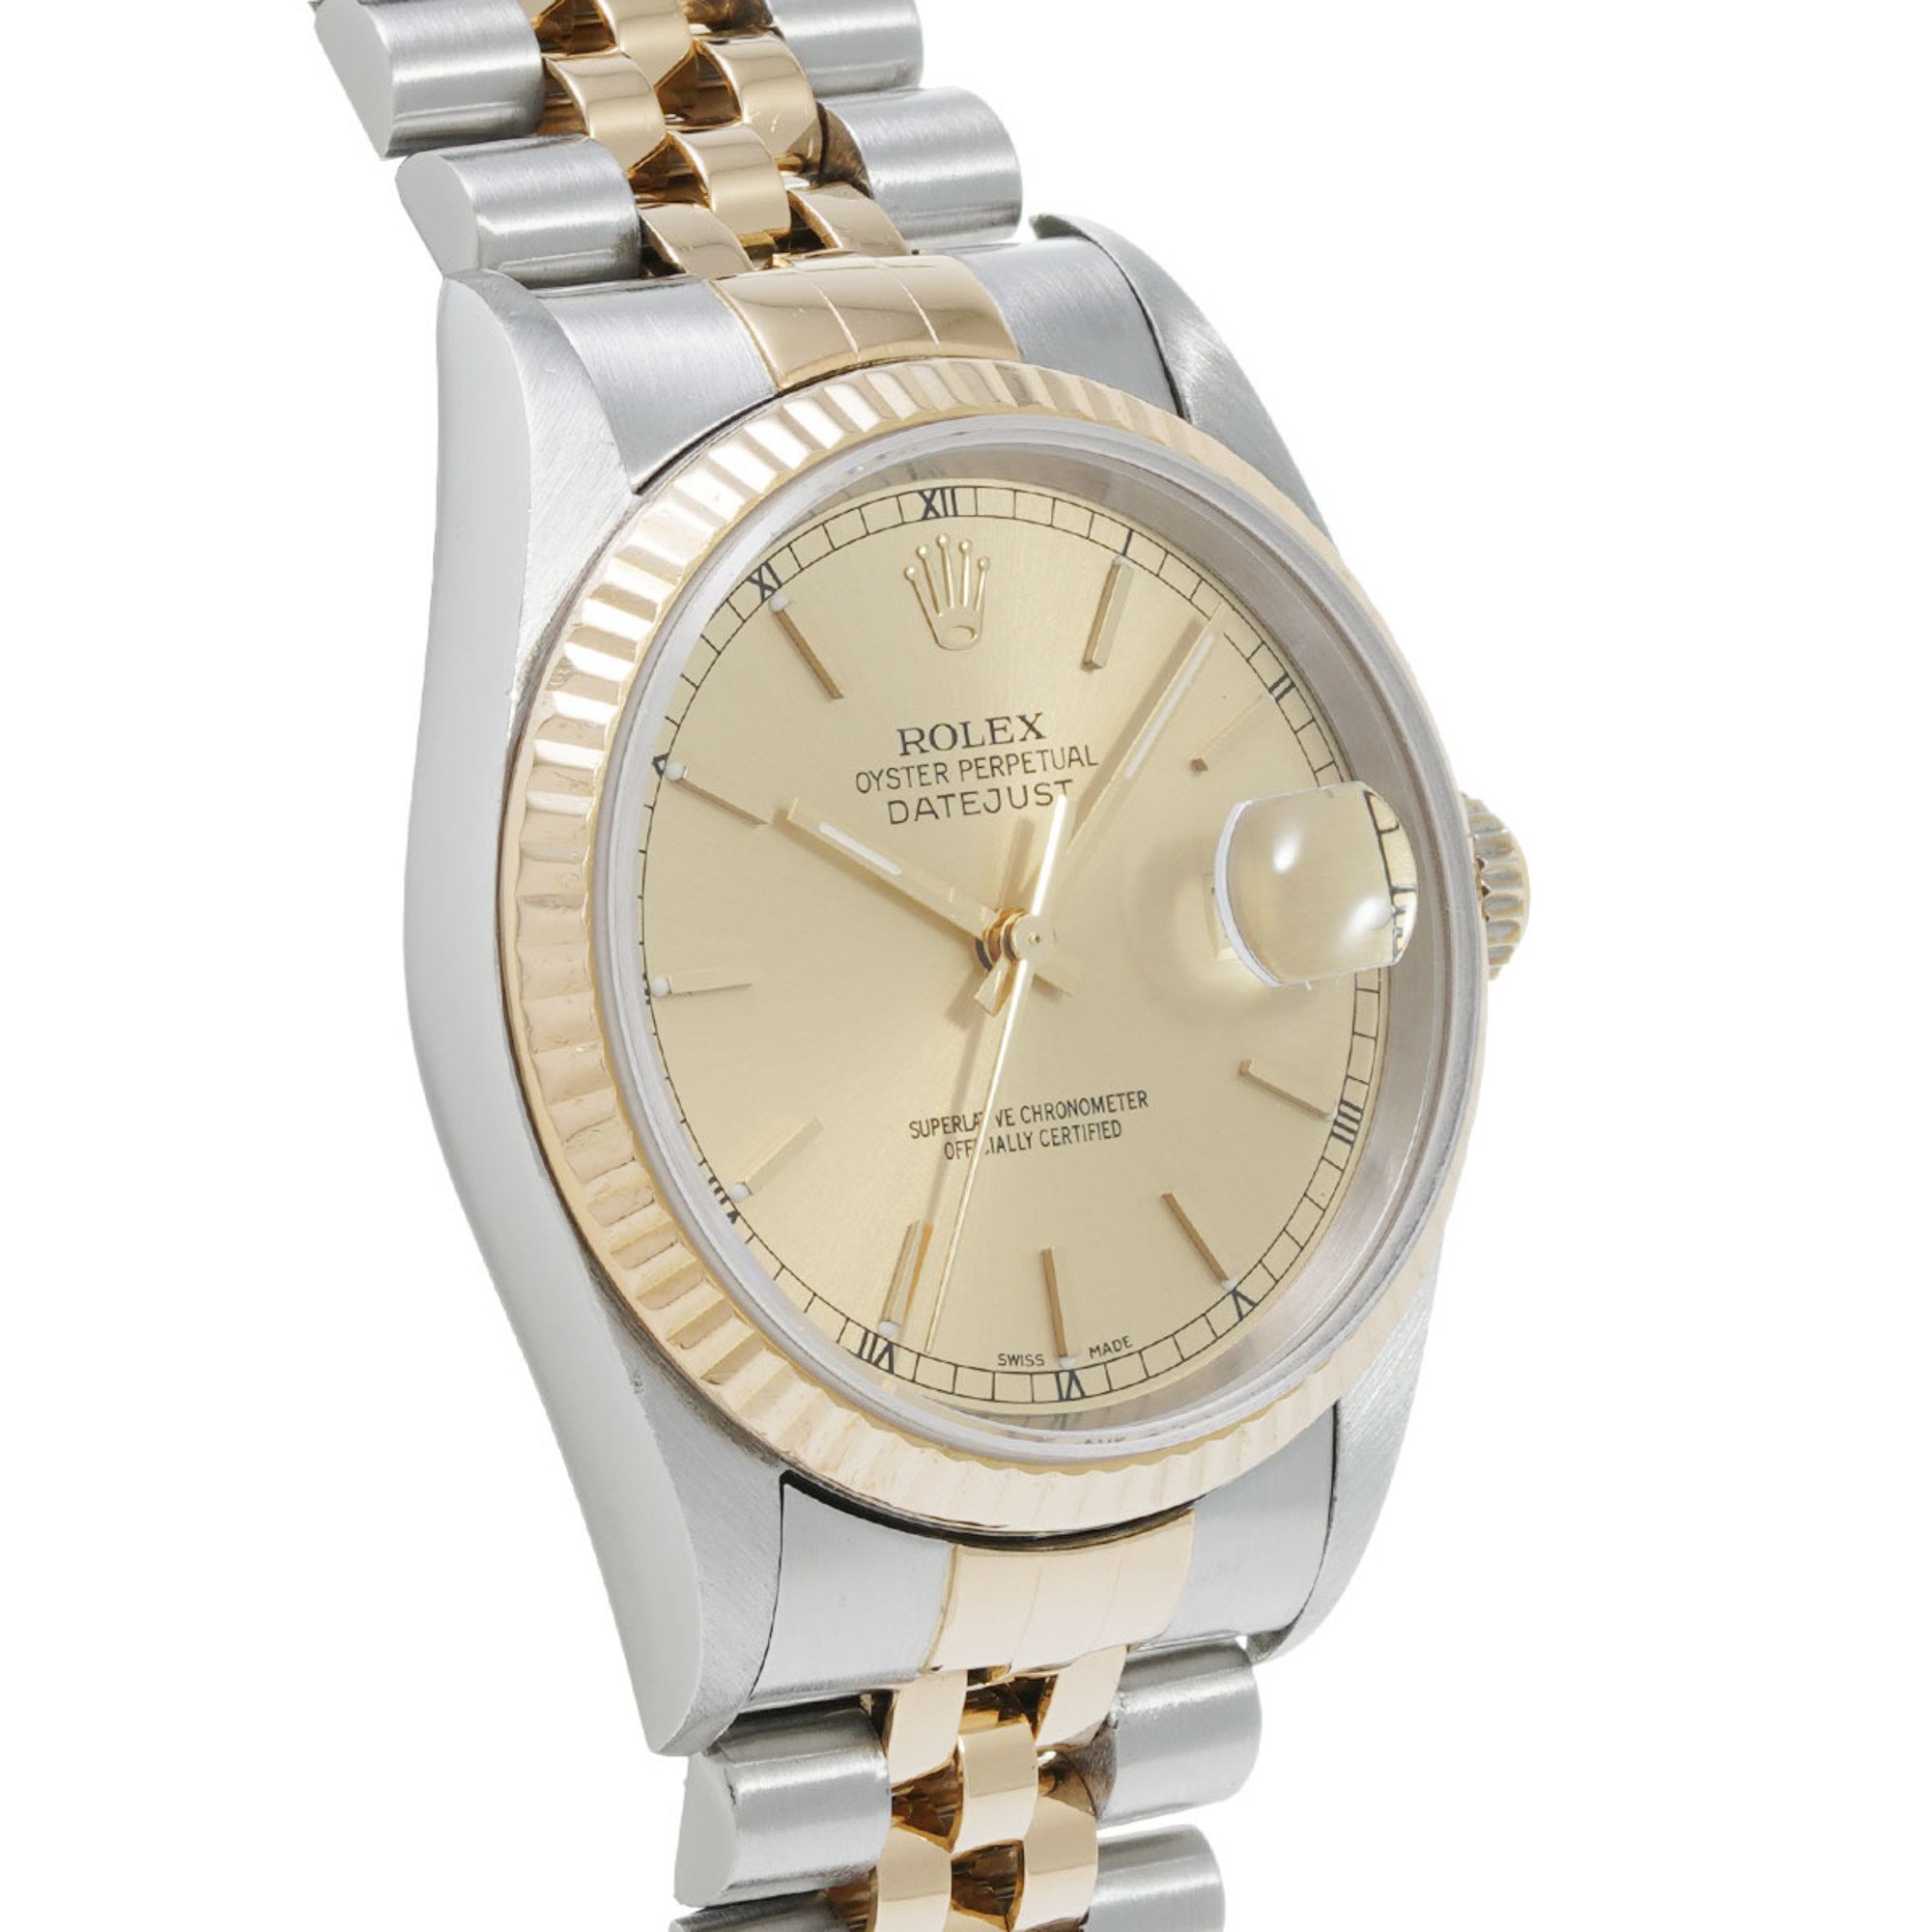 ROLEX Rolex Datejust 16233 Men's YG/SS Watch Automatic Champagne Dial